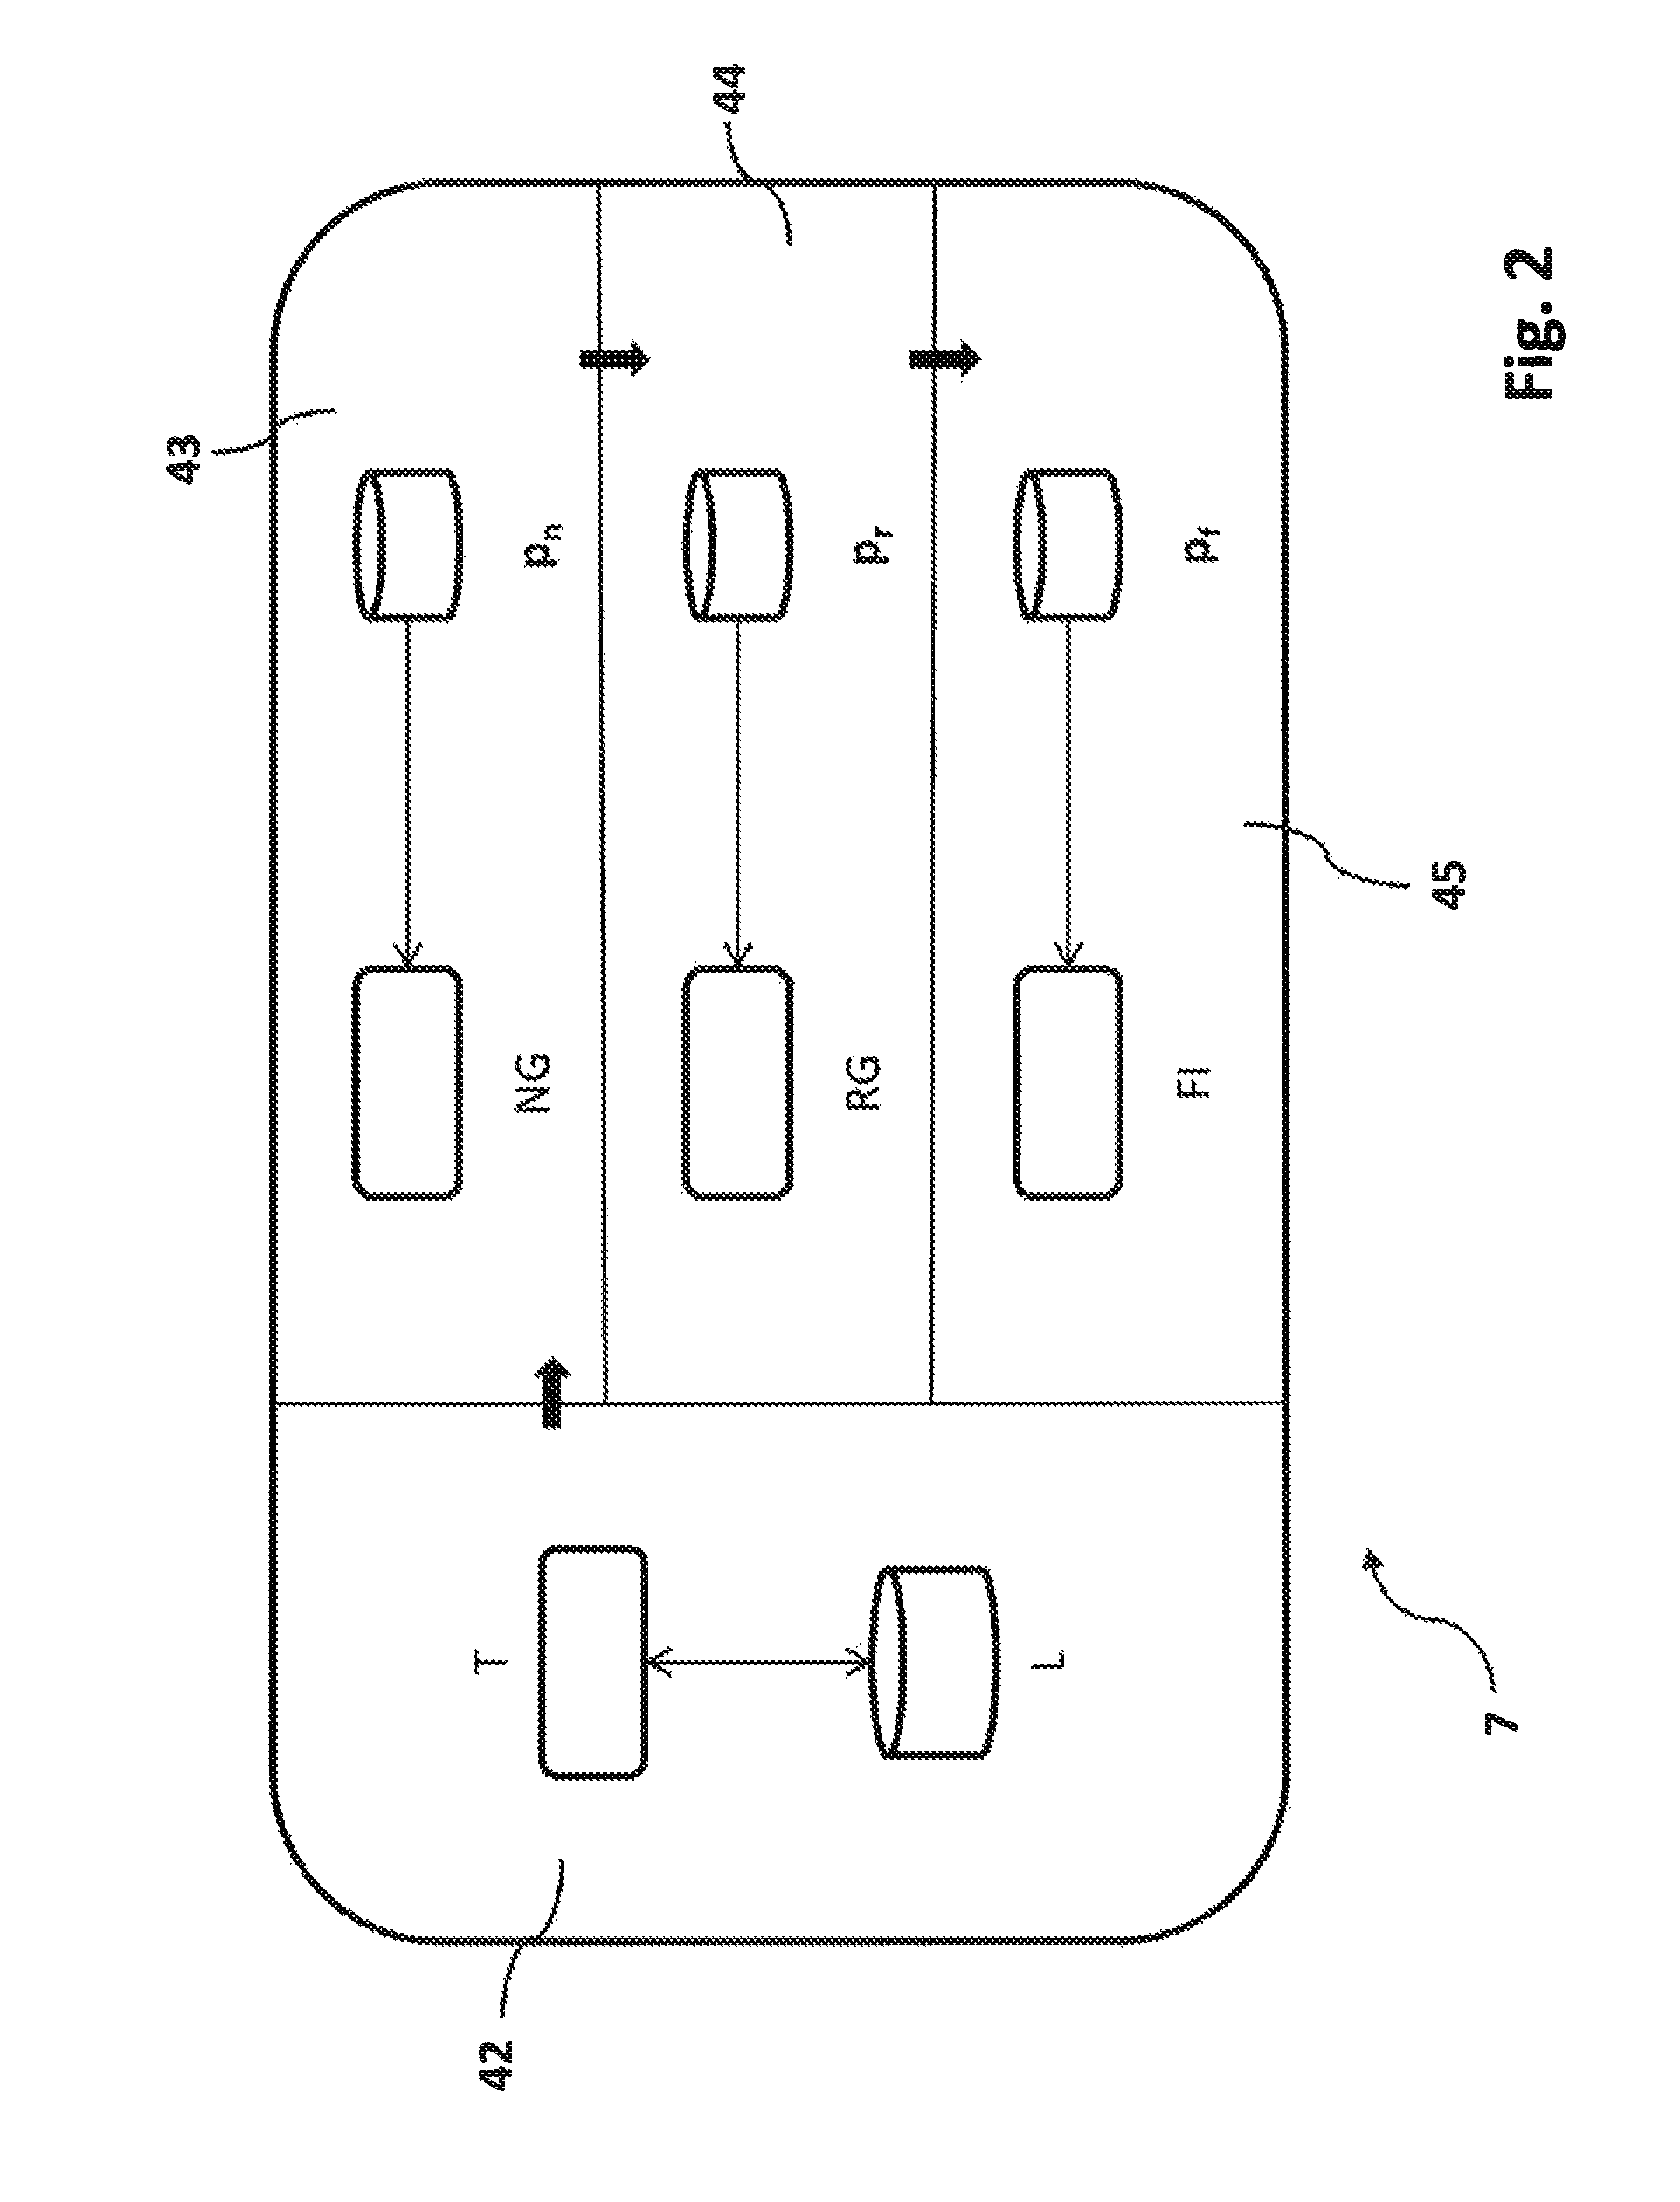 Method and device for performing natural language searches